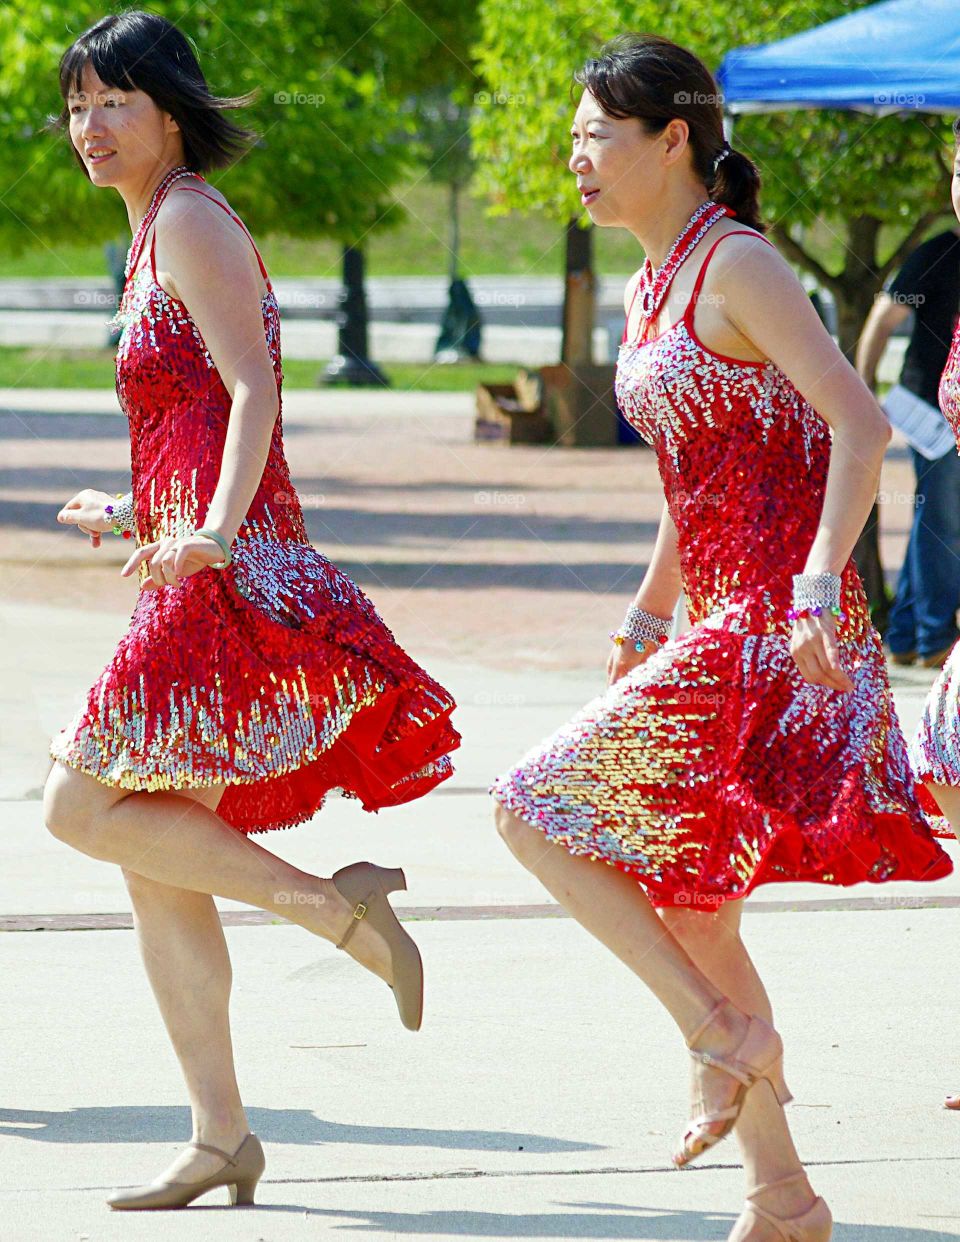 Modern Asian Dance. Asian American Heritage Festival held at the Kensico Dam Plaza in Valhalla, New York on May 30, 2015.